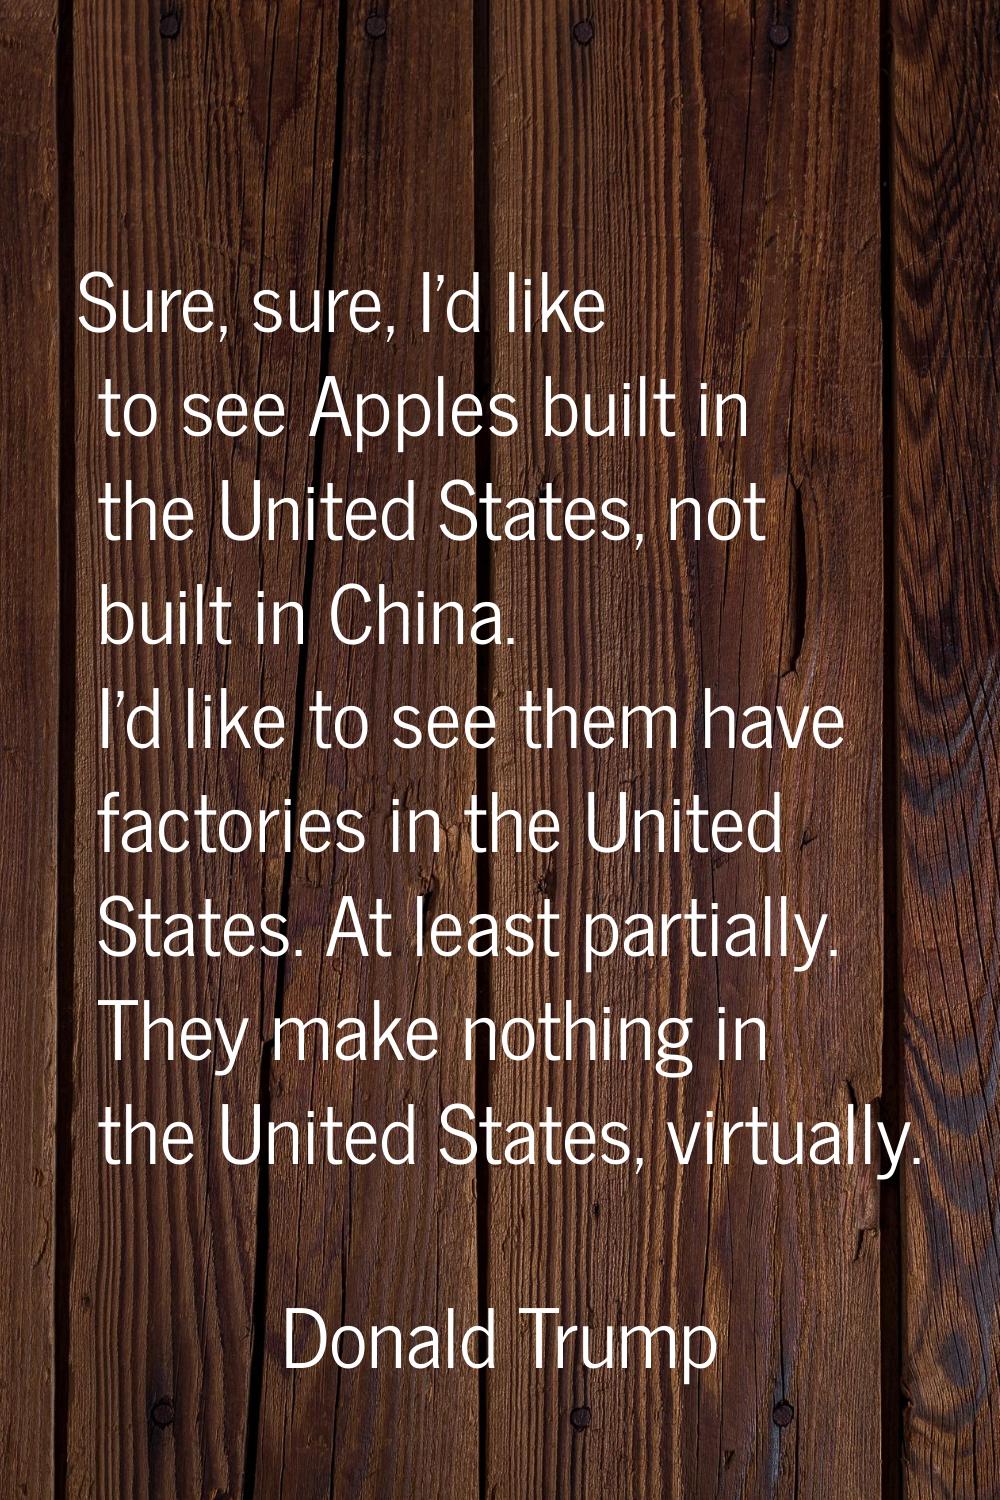 Sure, sure, I'd like to see Apples built in the United States, not built in China. I'd like to see 